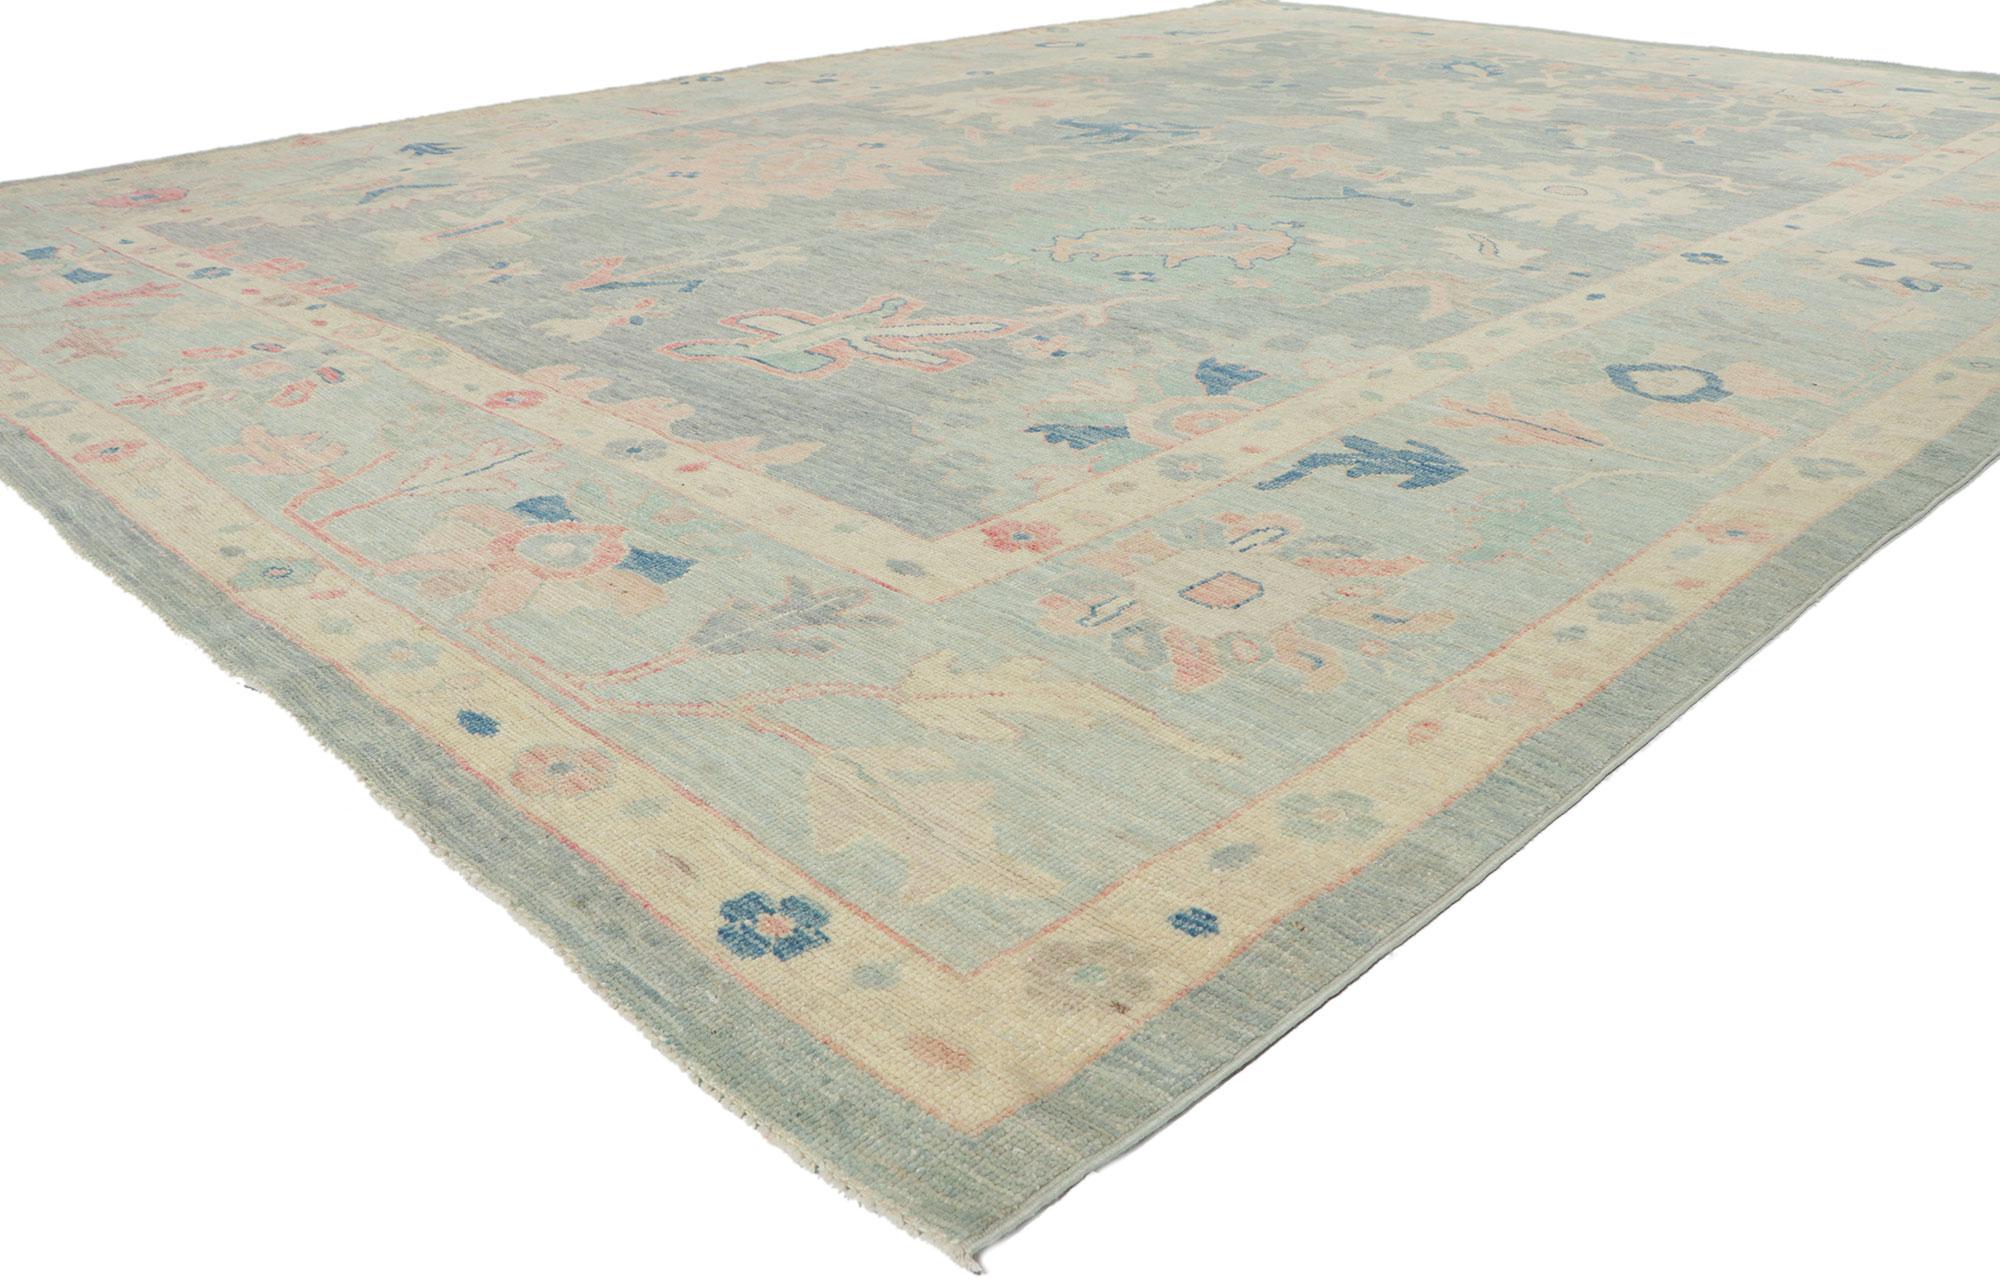 80929 new contemporary oushak rug with Modern style, 10'00 x 13'10.